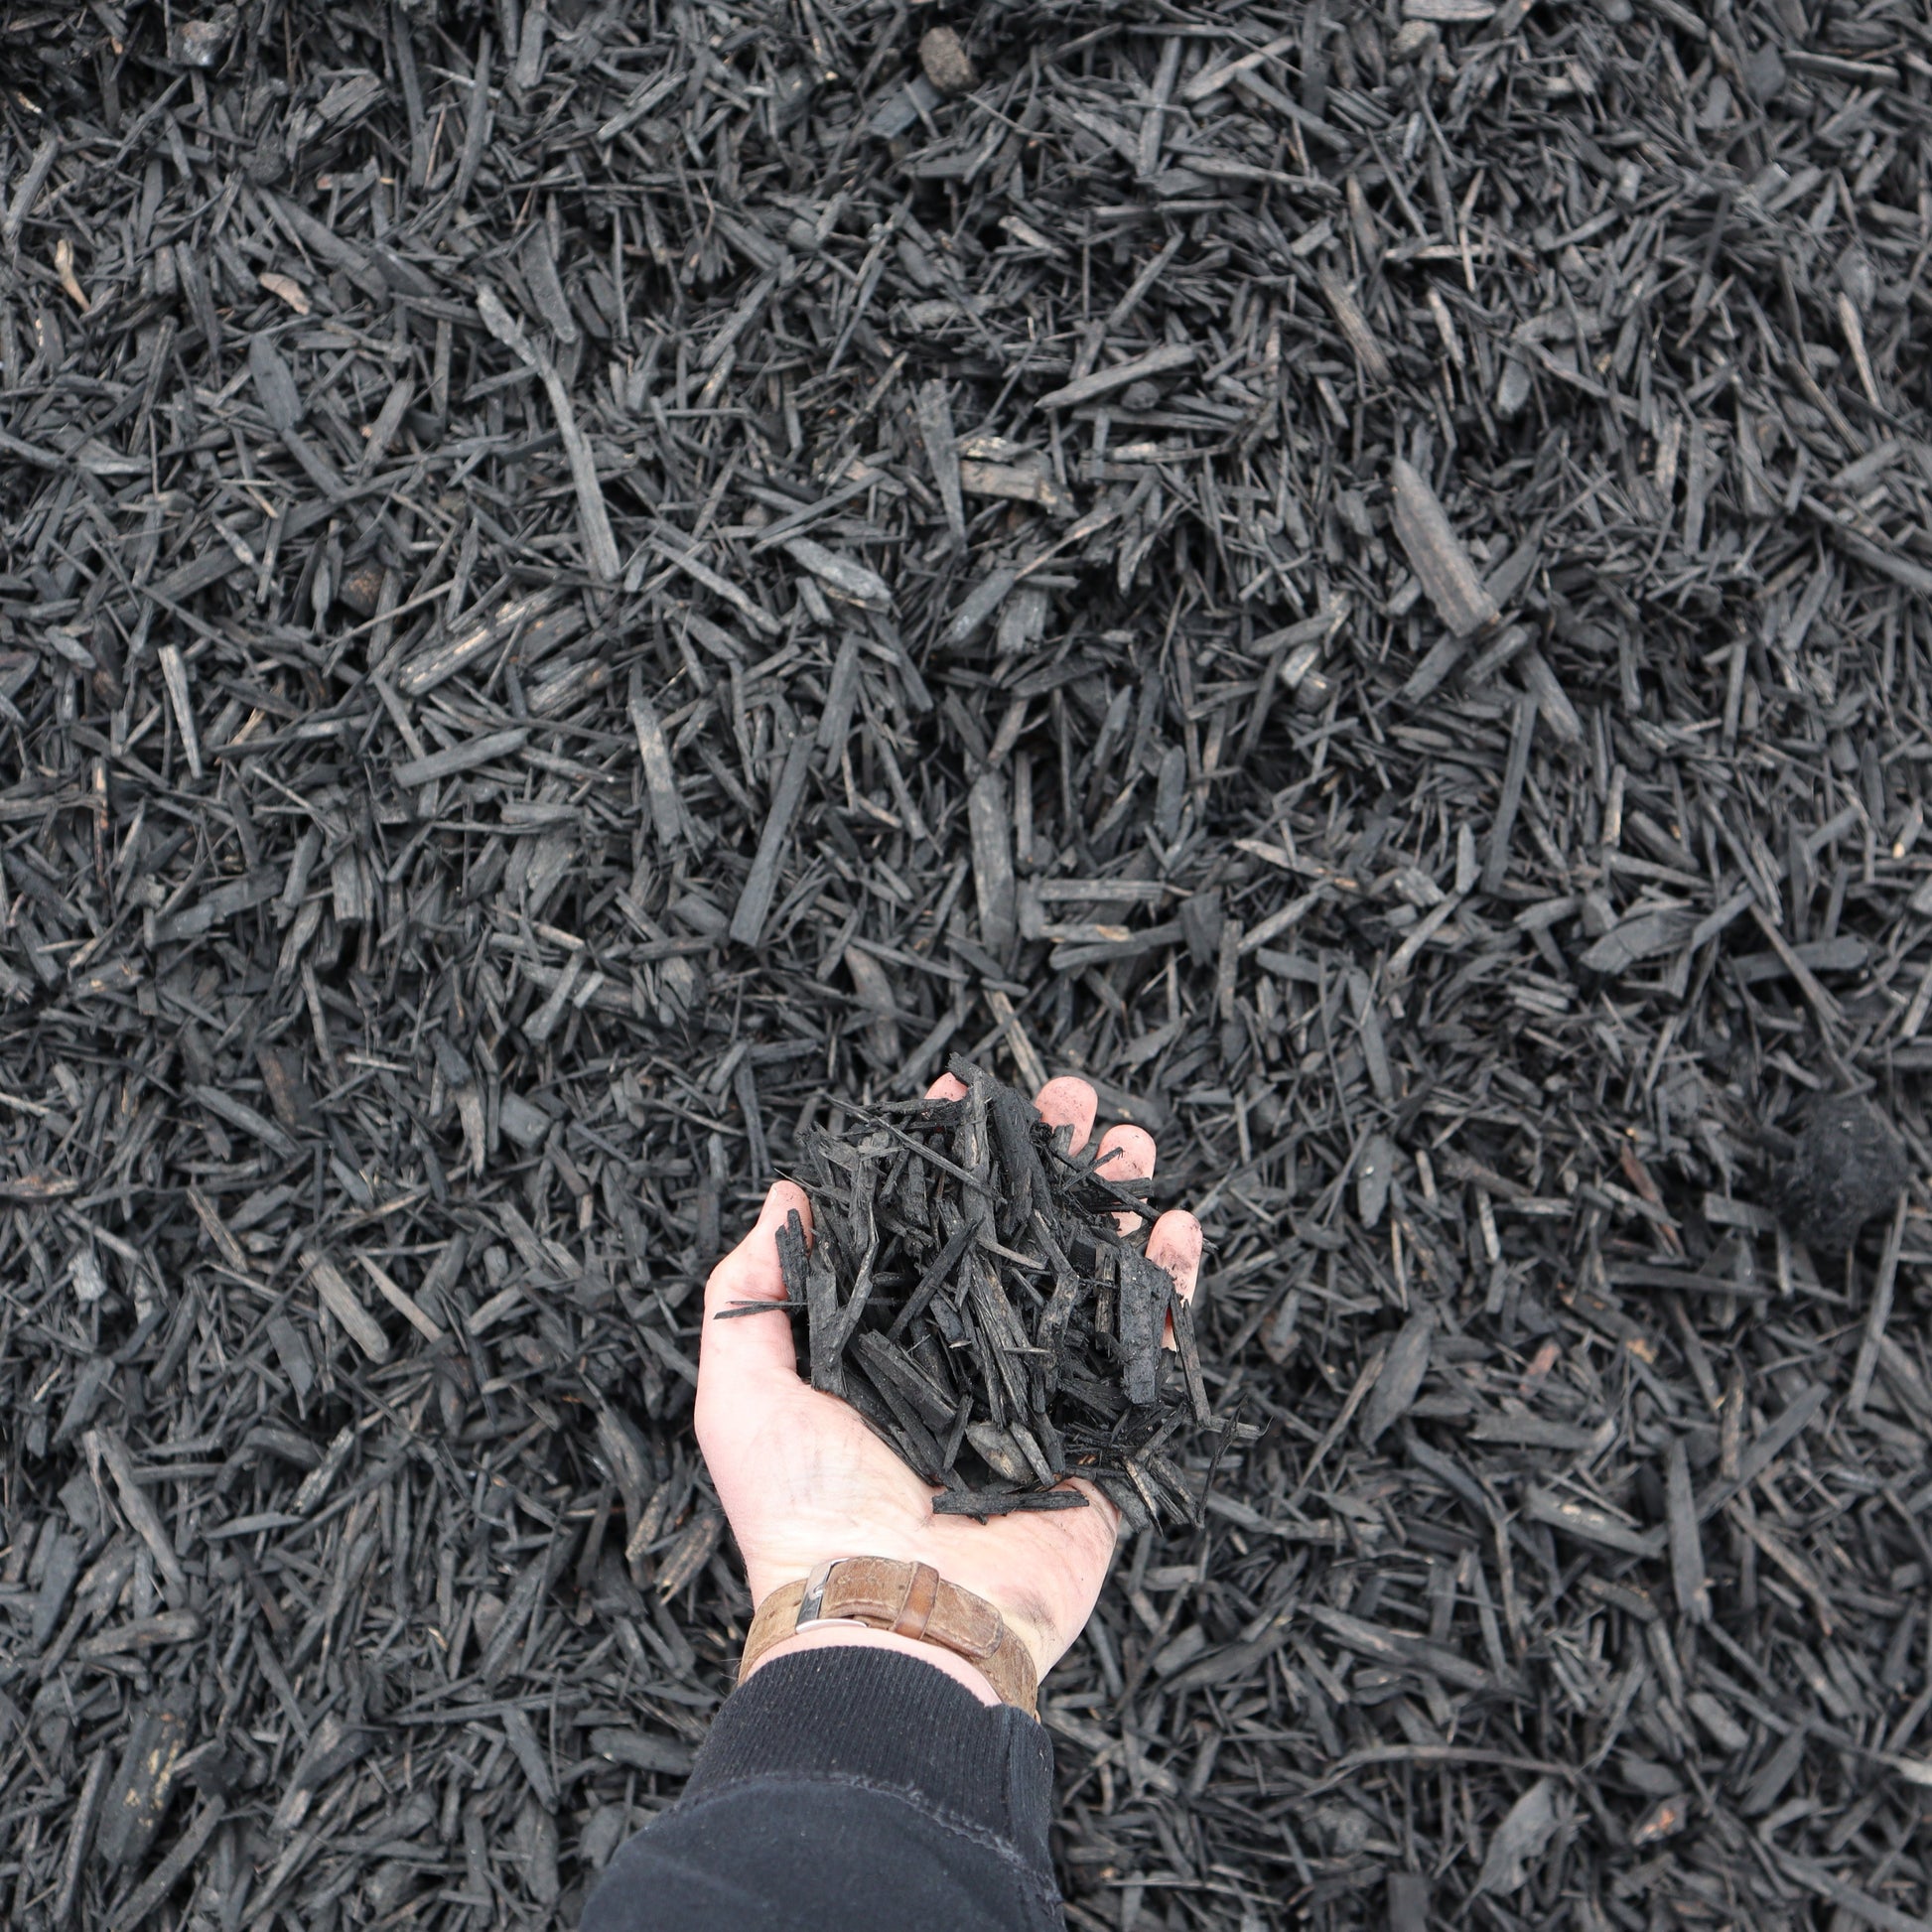 Black beauty bark mulch available via small dump truck load by Missoula Dirt Delivery